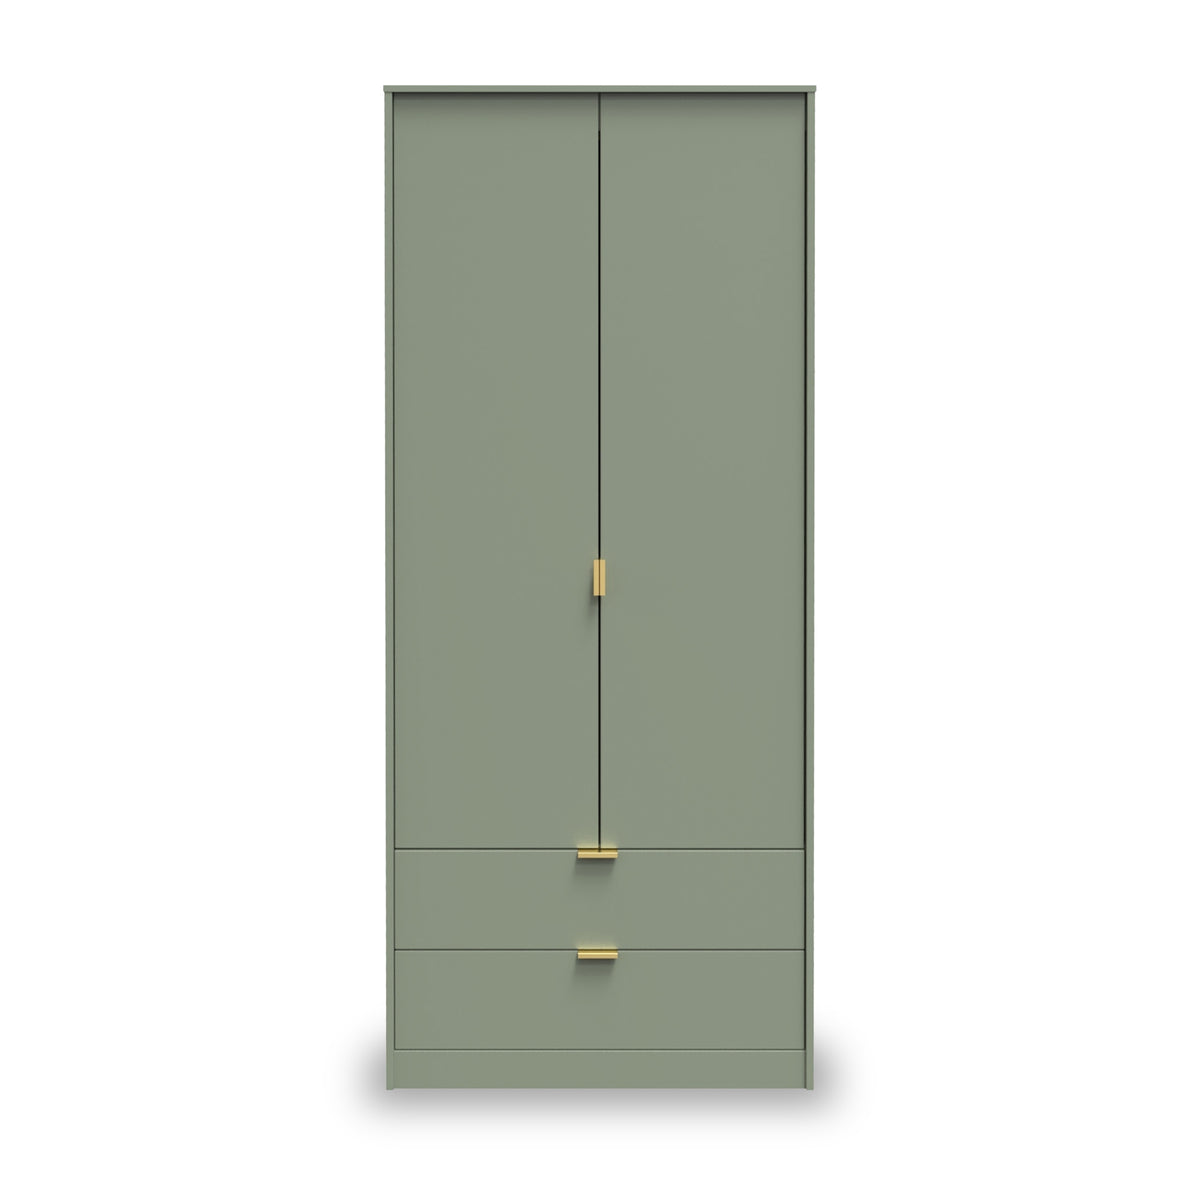 Moreno Olive Green 2 Door 2 Drawer Double Wardrobe from Roseland furniture